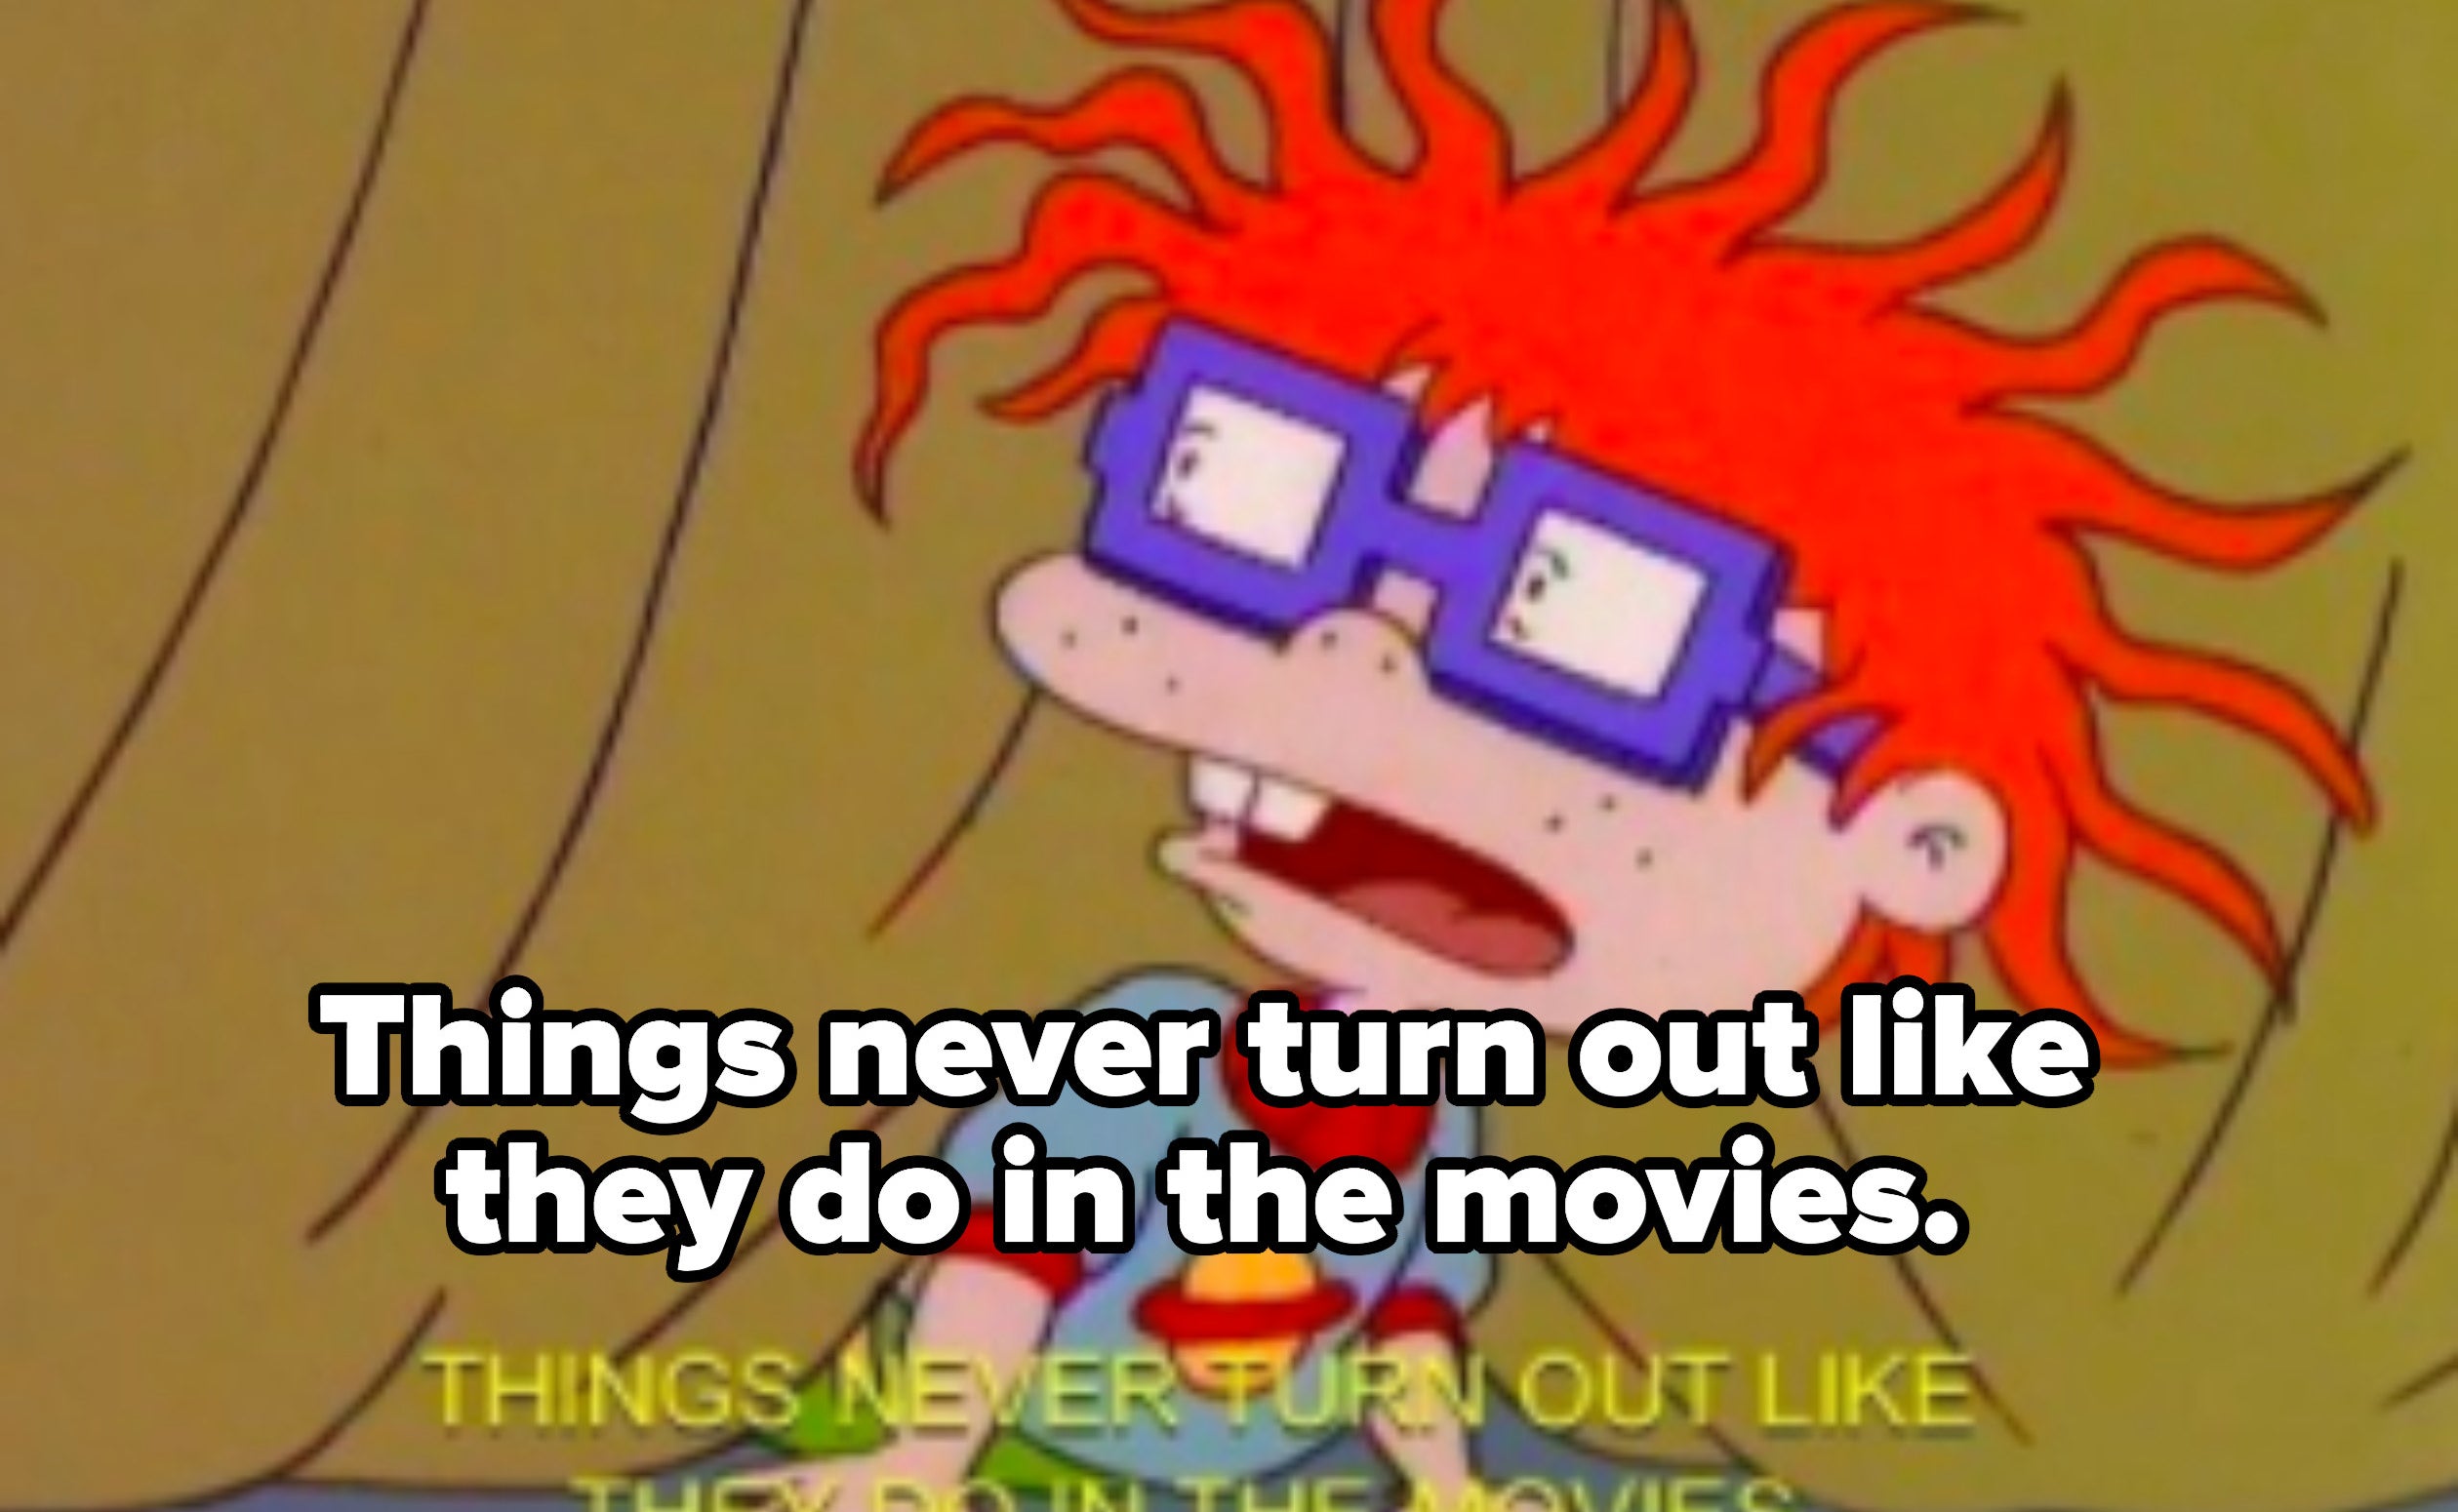 Chuckie: &quot;Things never turn out like they do in the movies&quot;